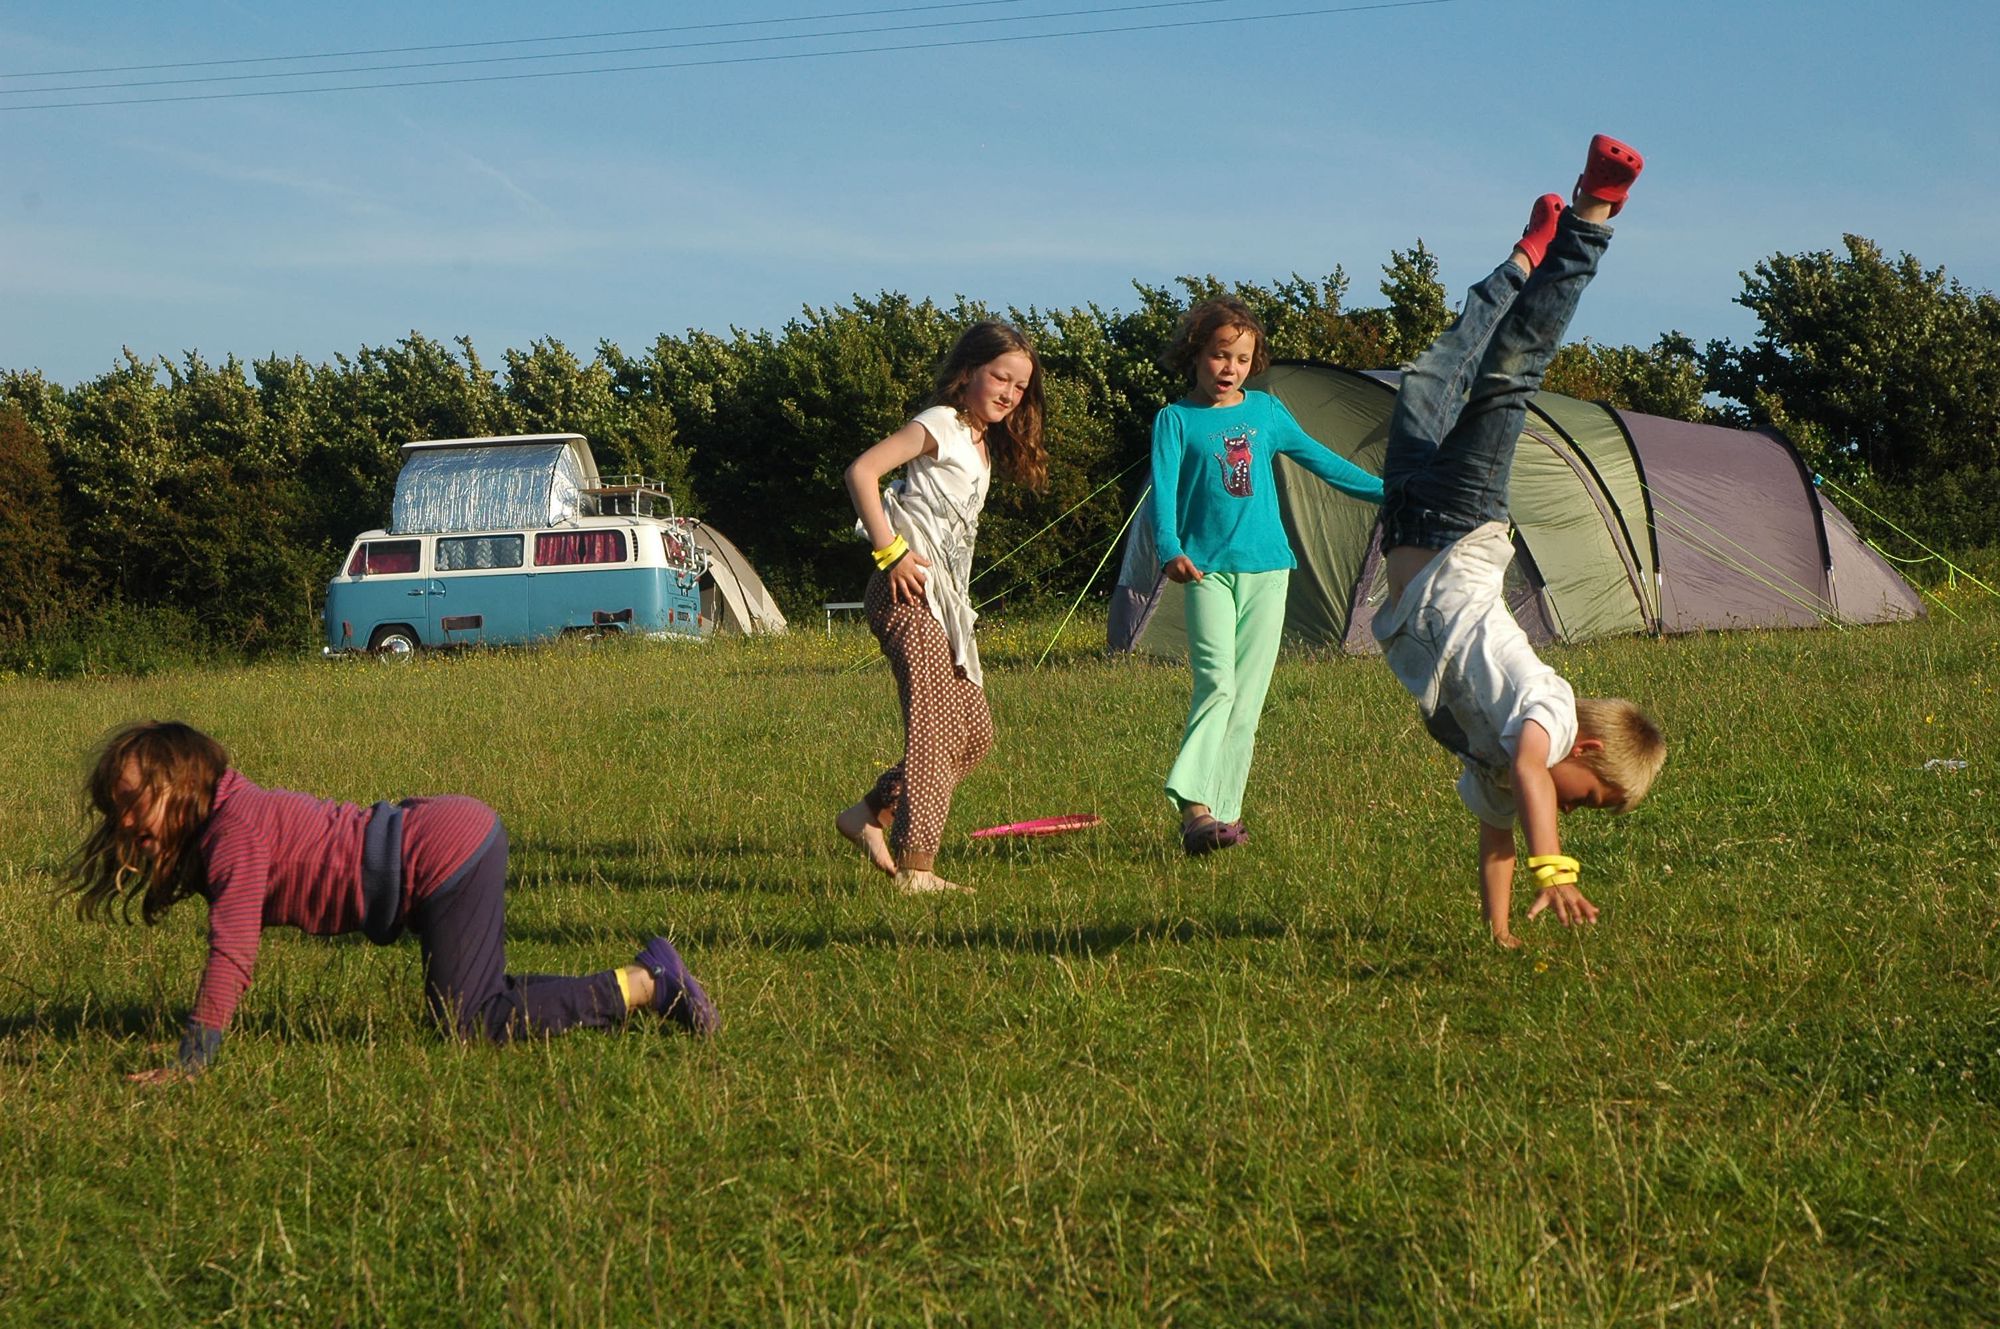 Family-friendly campsites in Cornwall